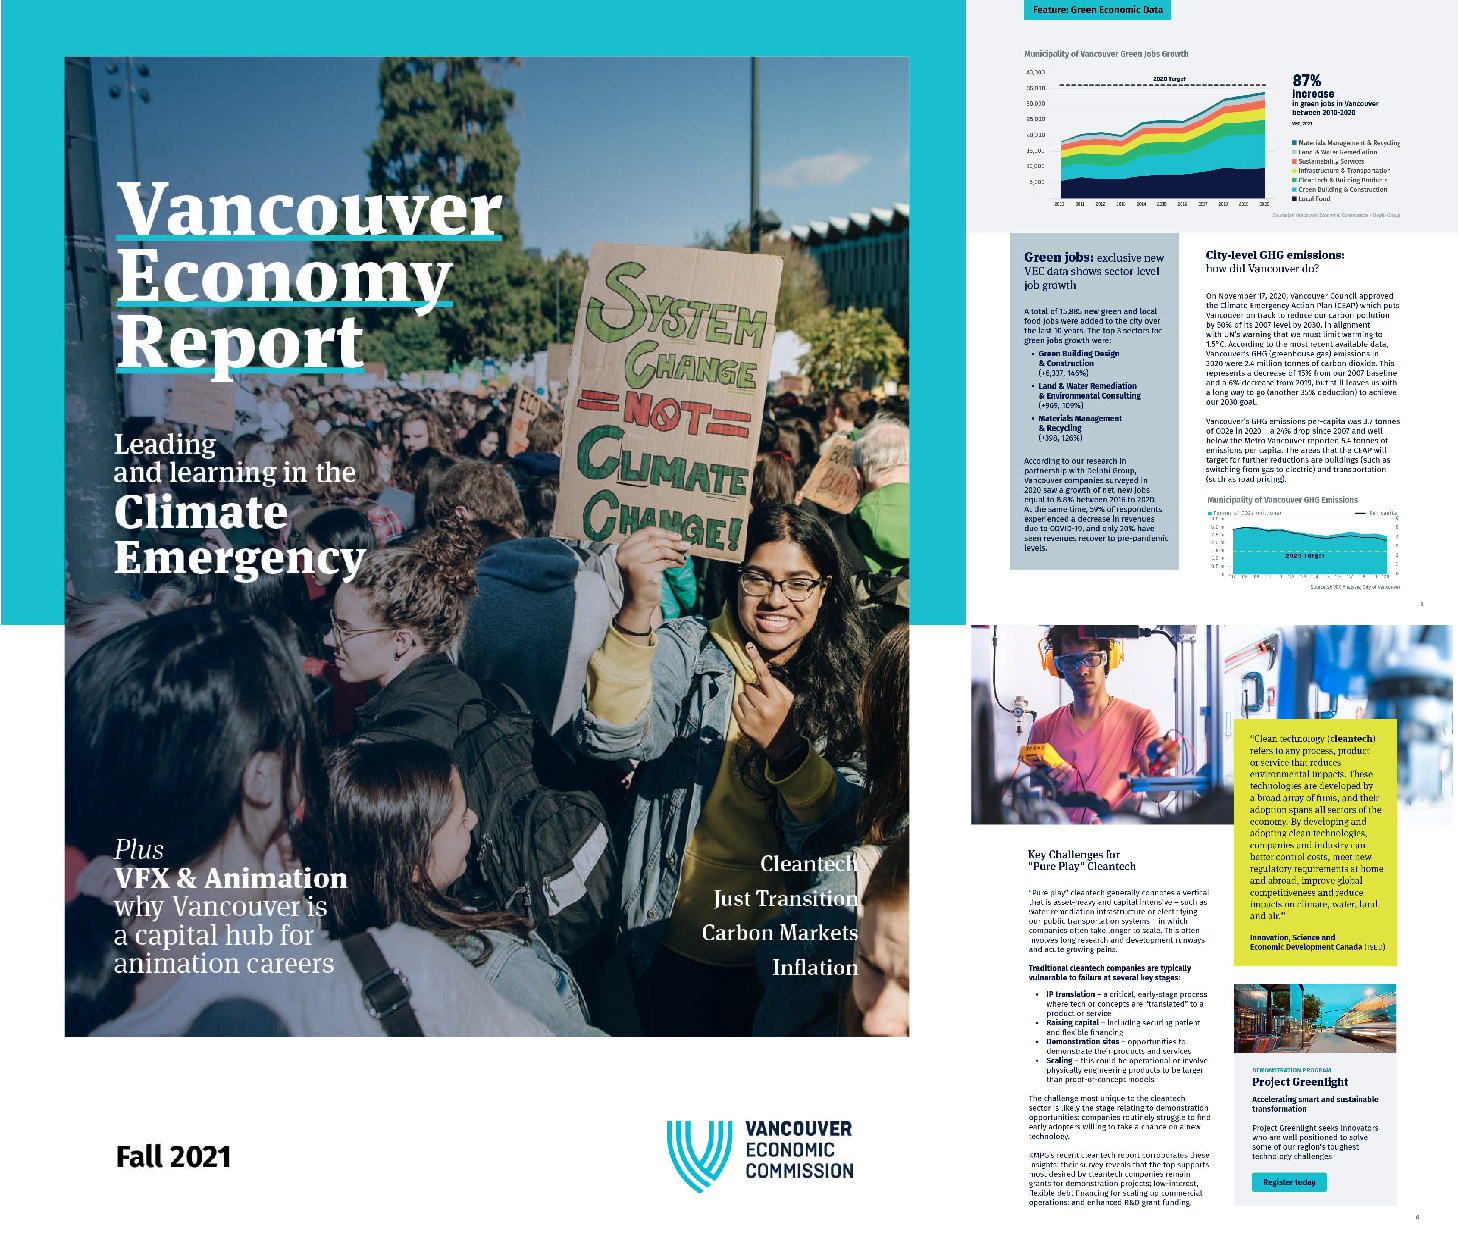 The cover of the Vancouver Economy Report October 2021 edition with screen shots of two of the inside pages